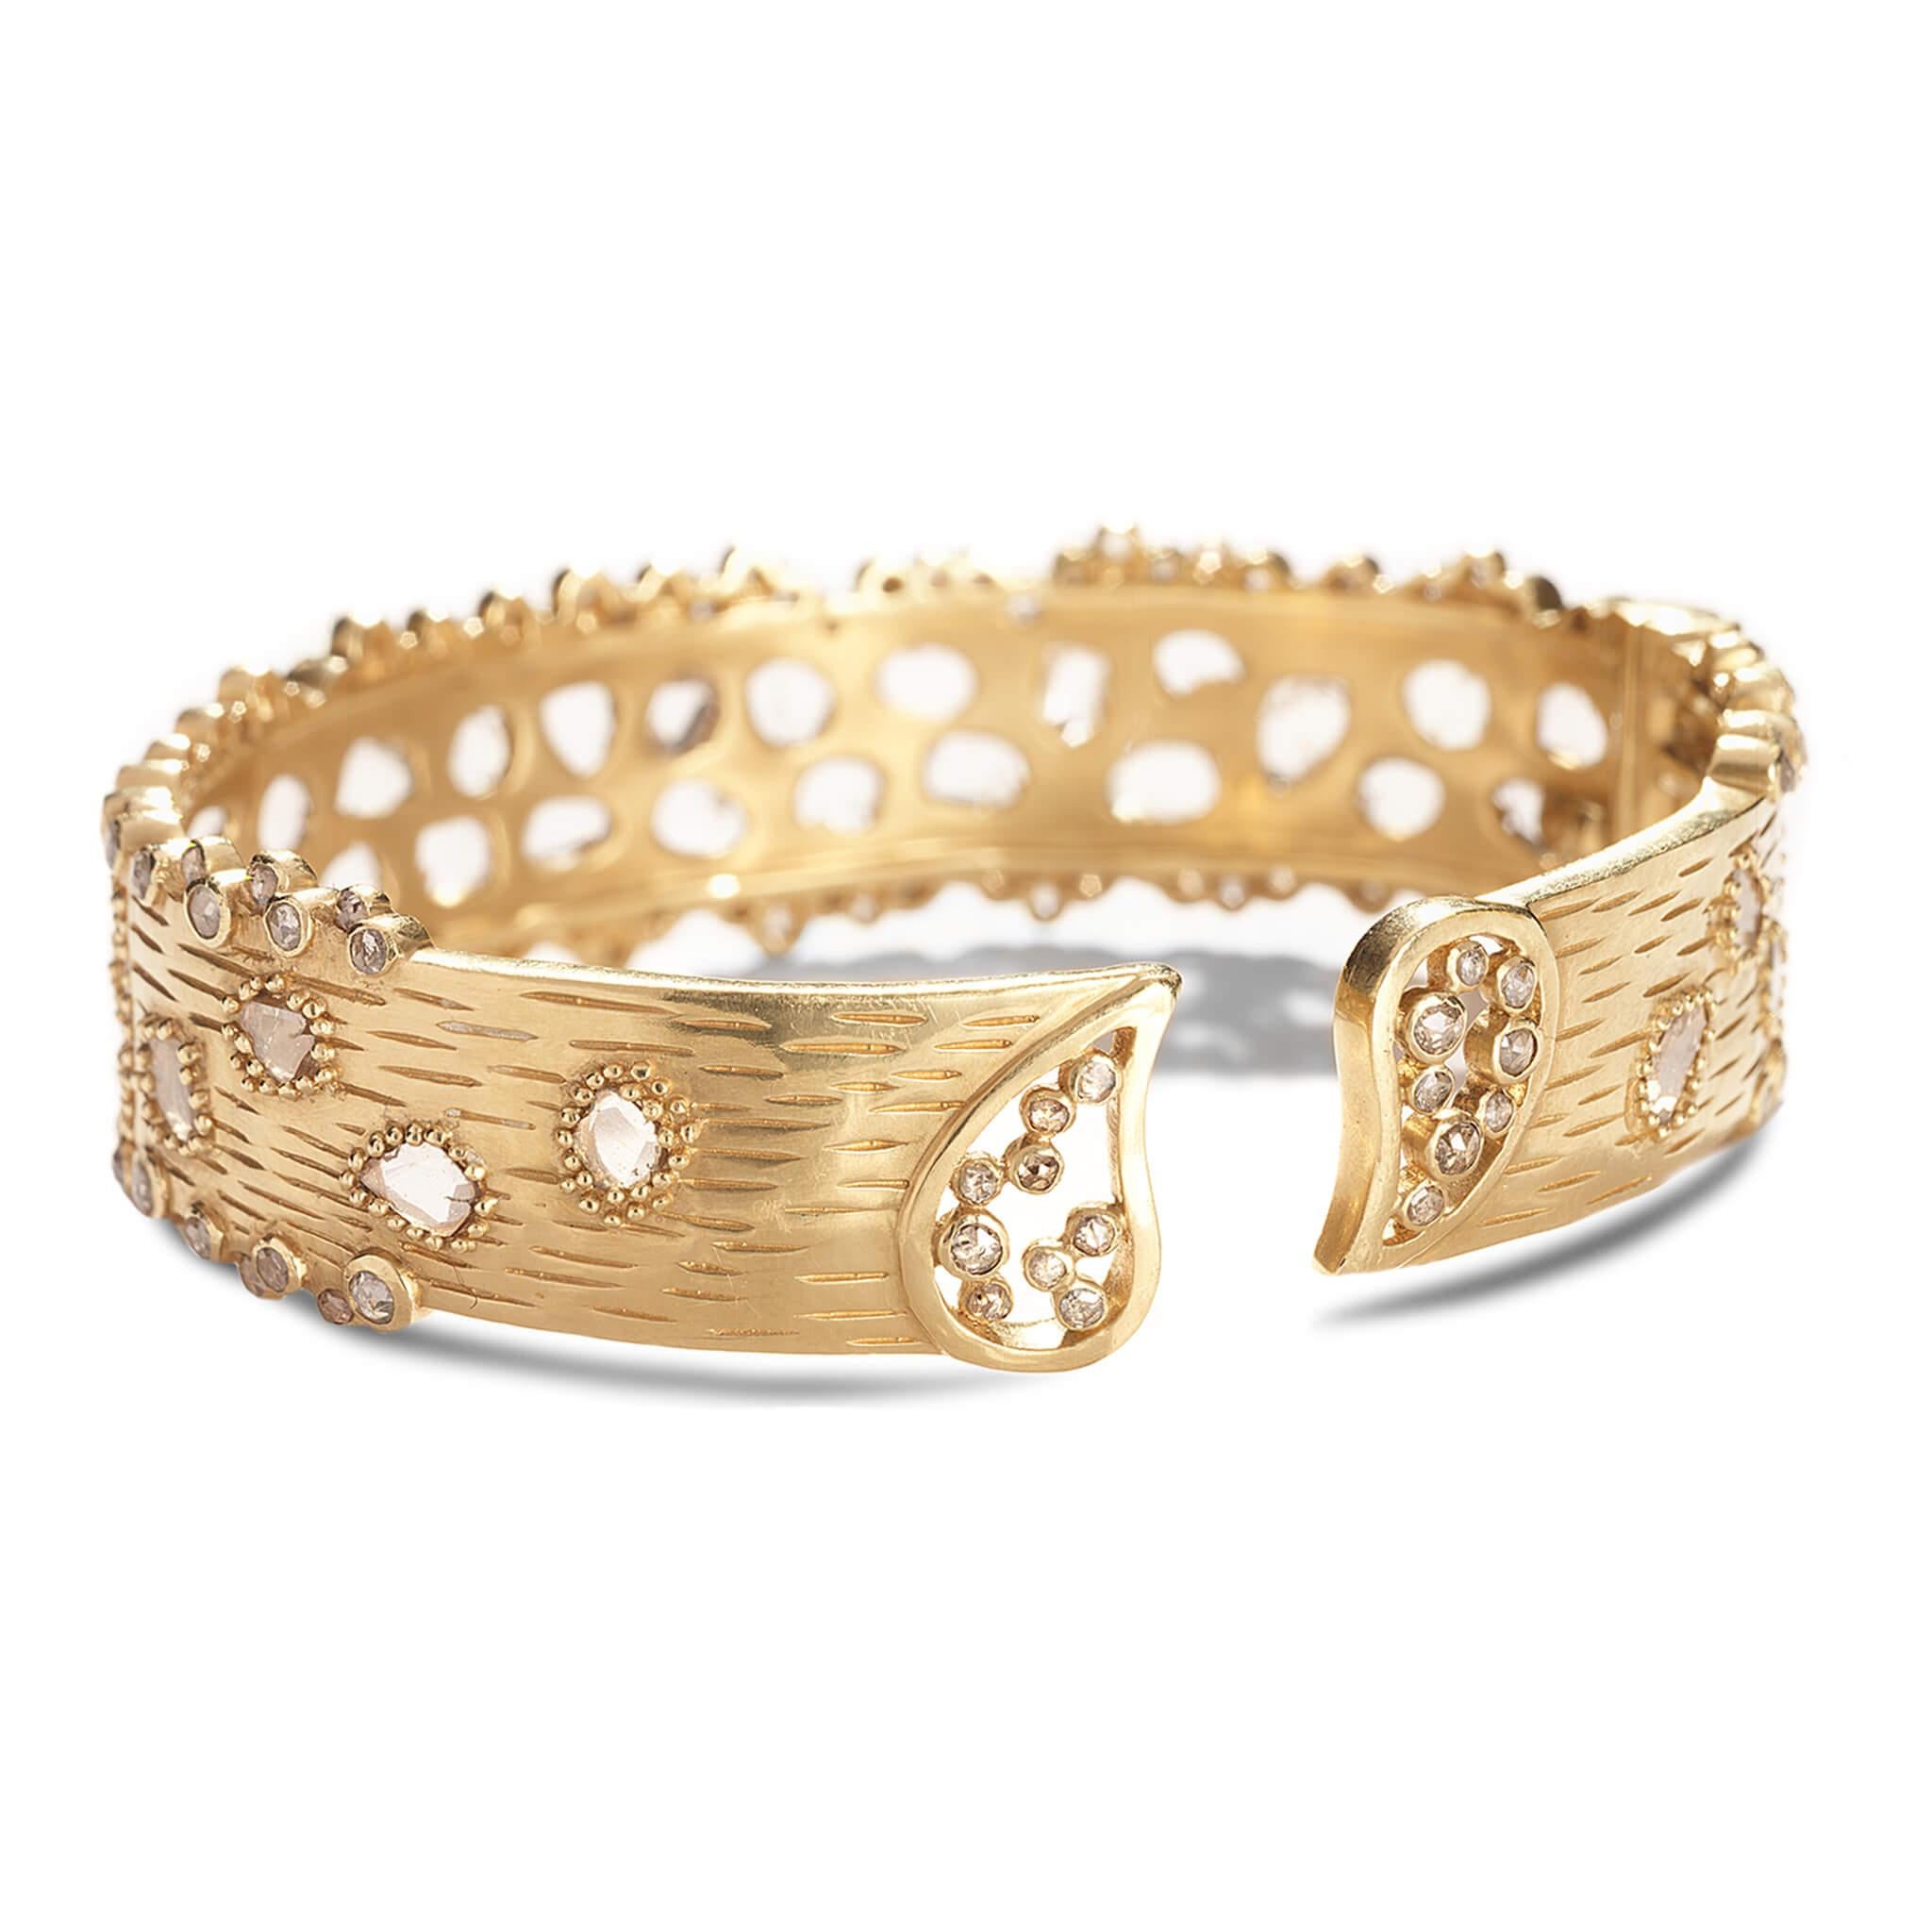 Coomi Luminosity cuff bracelet set in 20K yellow gold with 5.04cts diamonds.

Coomi’s Luminosity Collection consists of bold design and reflects light from within. Each uniquely natural rose cut diamond and diamond slice are chosen by Coomi for the